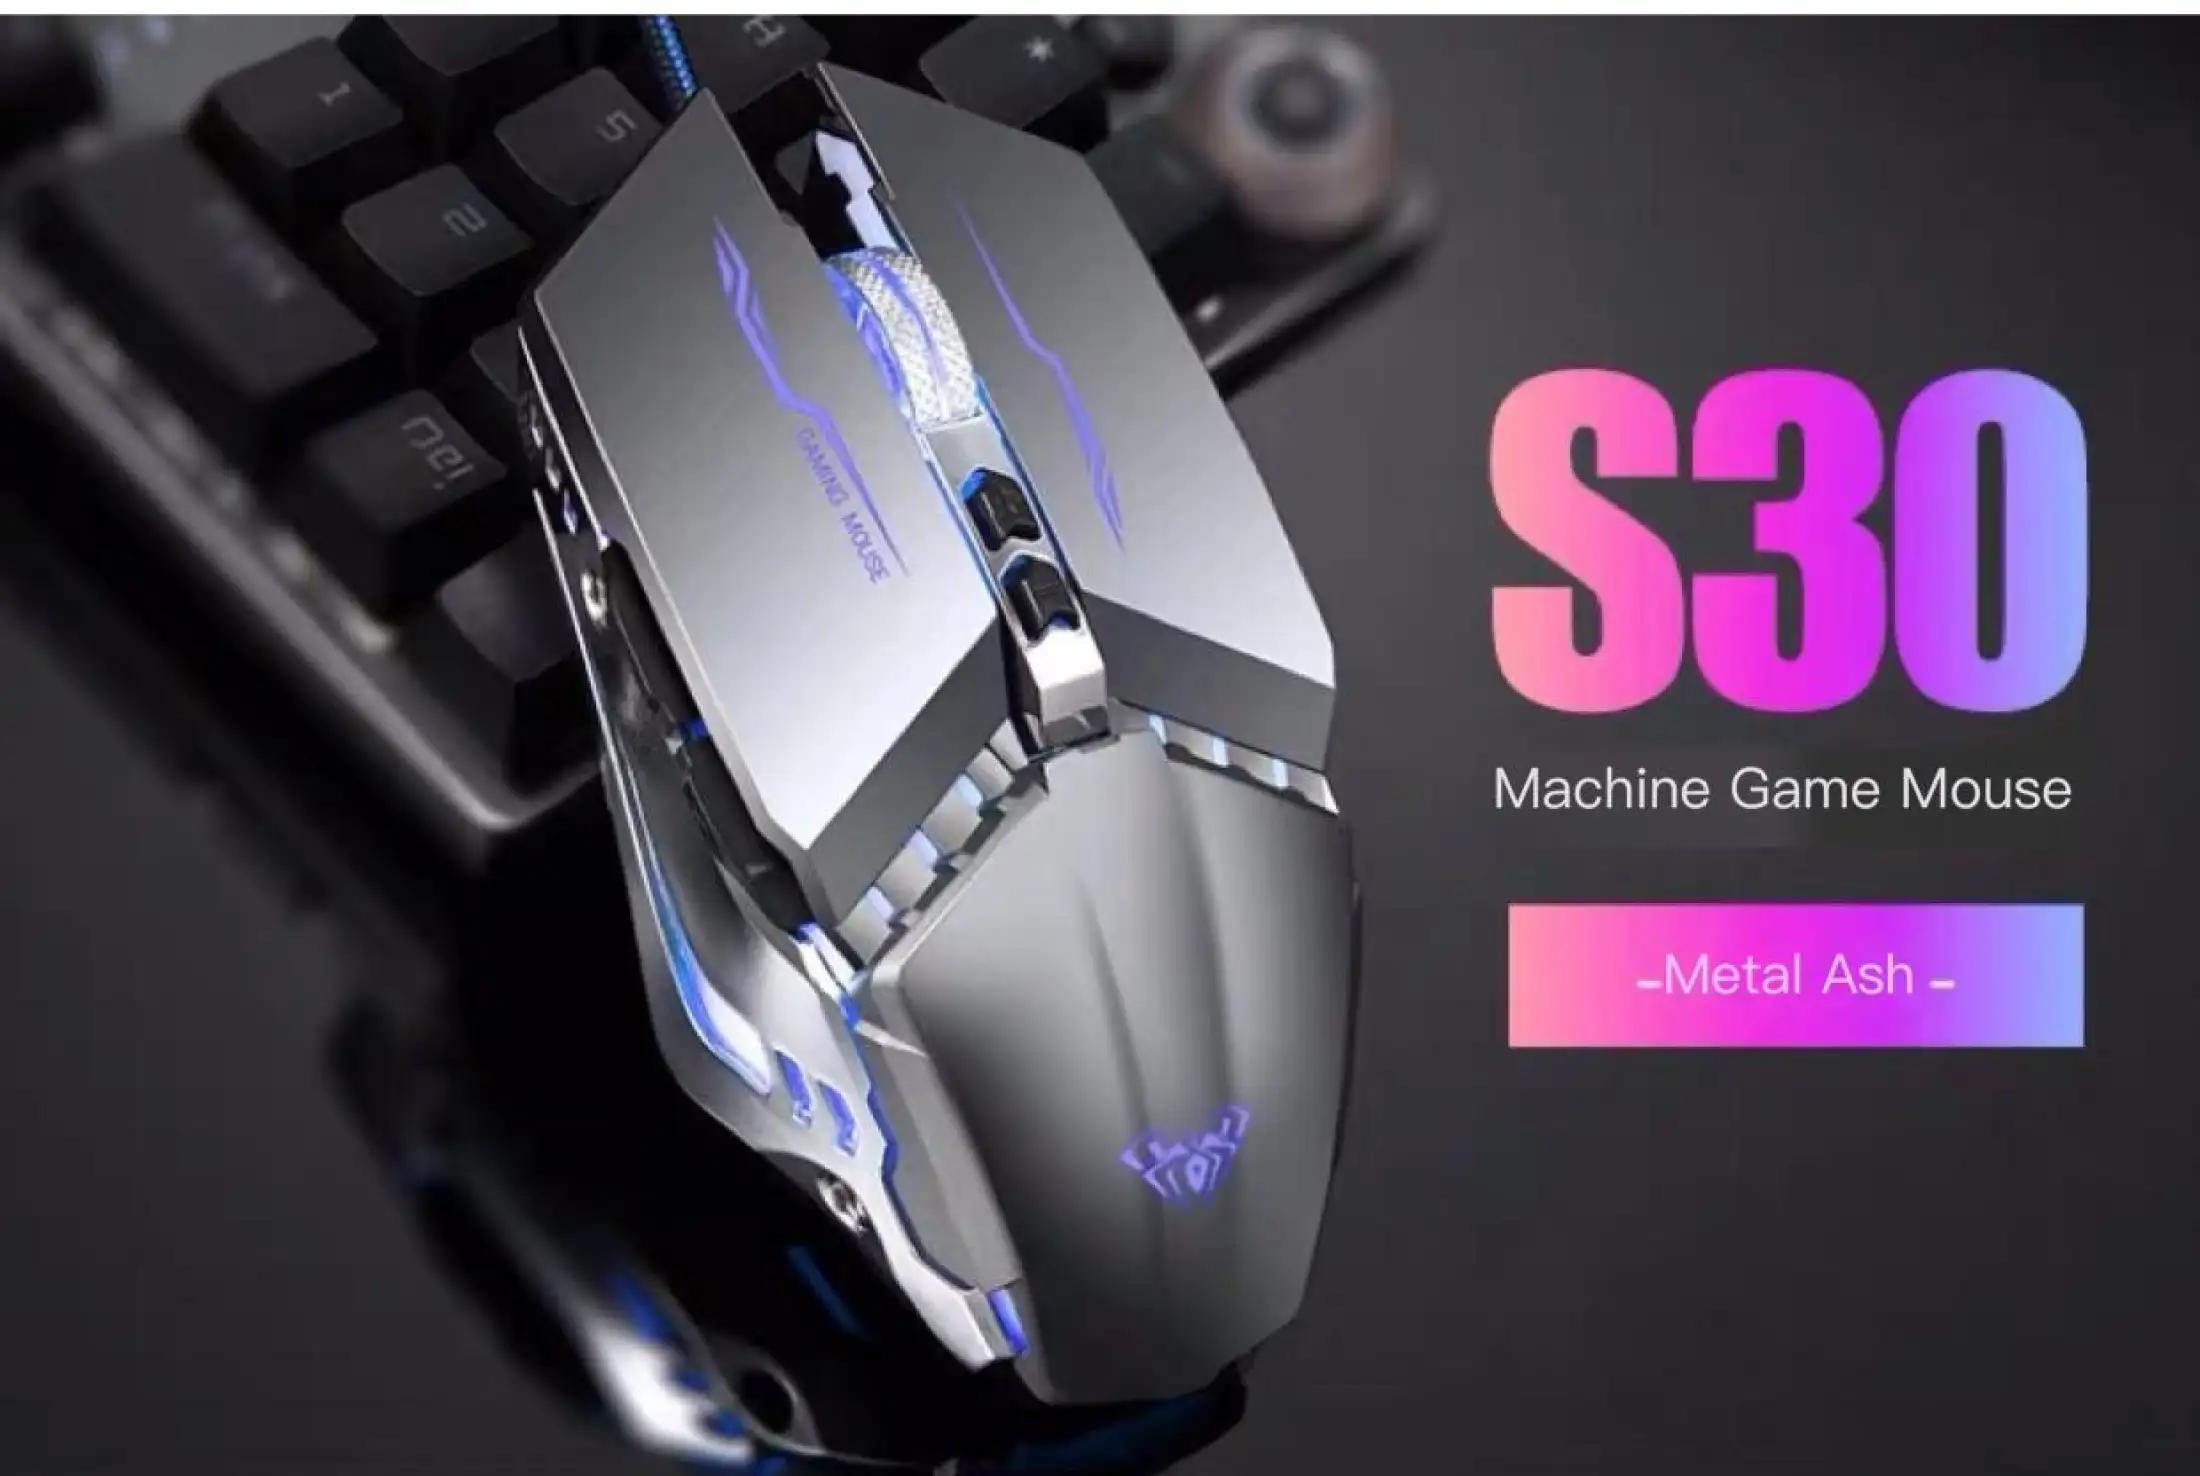 AULA S30 Gaming Mouse 7Button Programmable Metal Mouse for Gamer PC Laptop  | Lazada Singapore